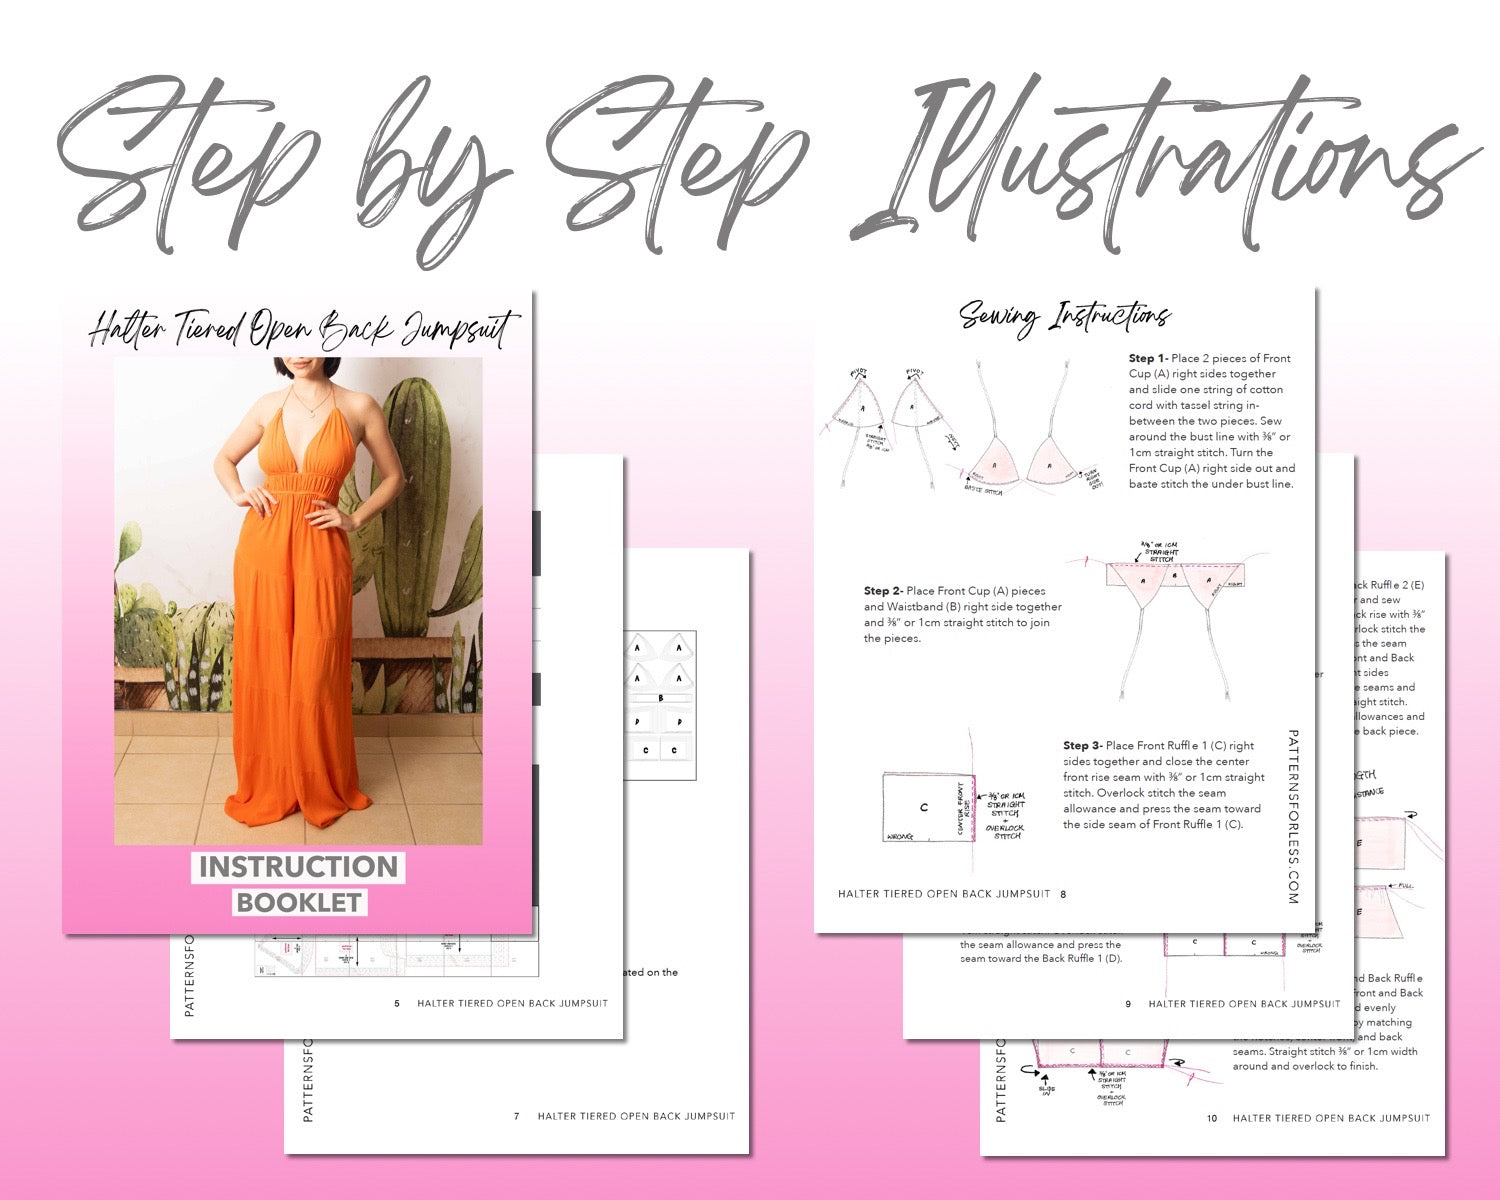 Halter Tiered Open Back Jumpsuit sewing pattern step by step illustrations.